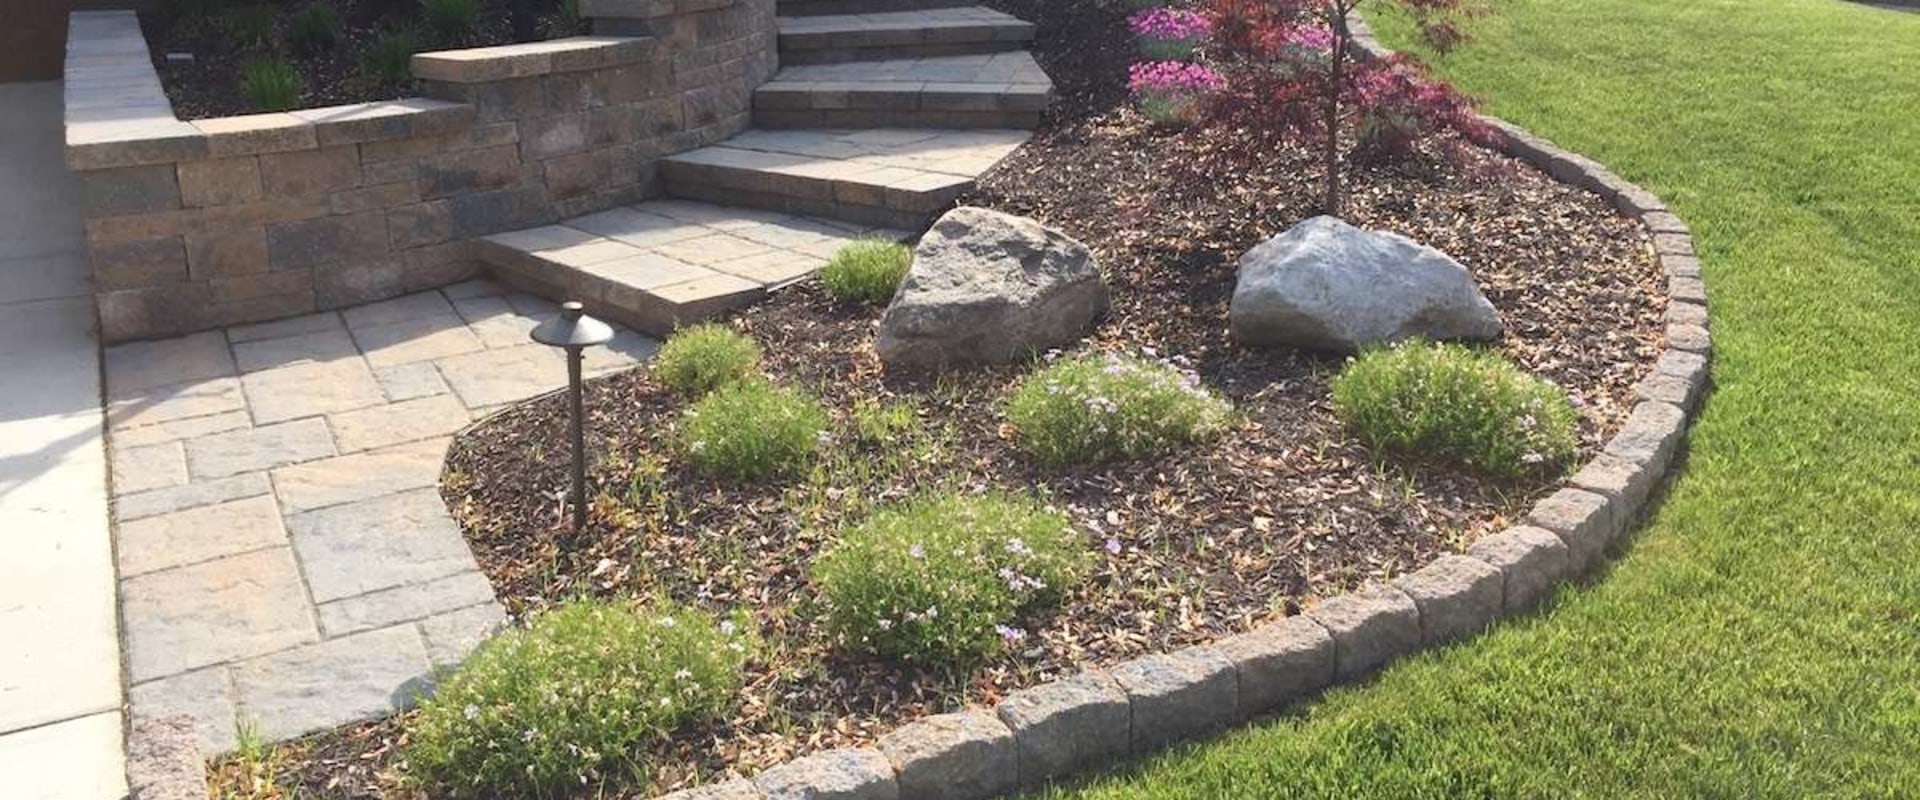 From Landscaping Services To Lawn Care: The Next Step To A Beautiful Northern Virginia Property